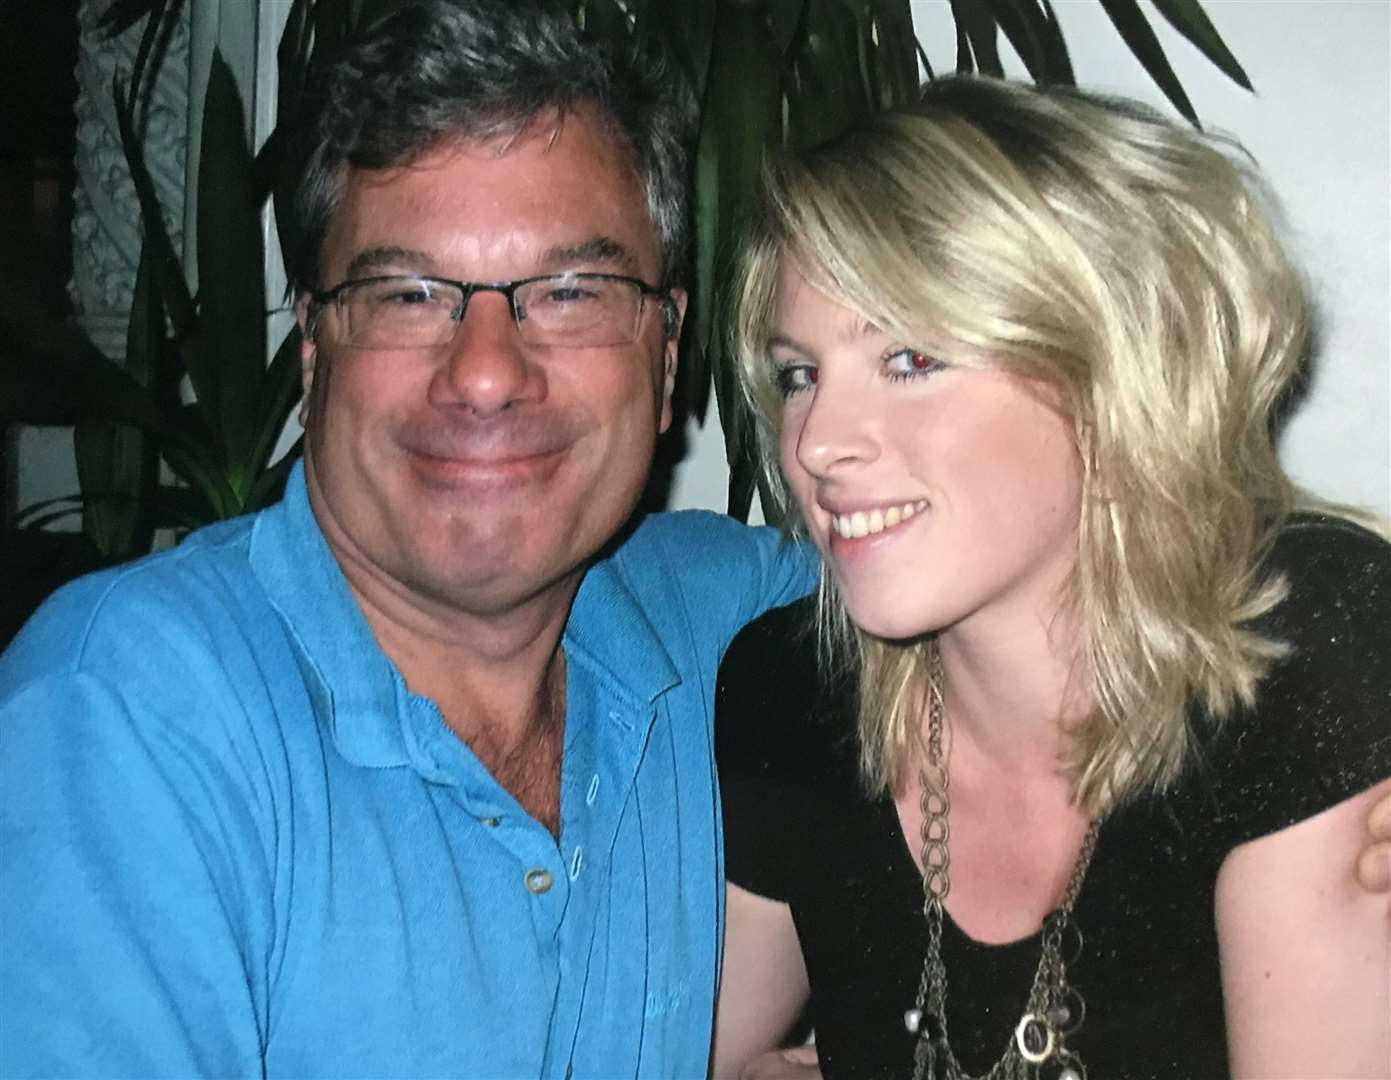 Jeremy Beale and his daughter Hannah O'Brien in happier times